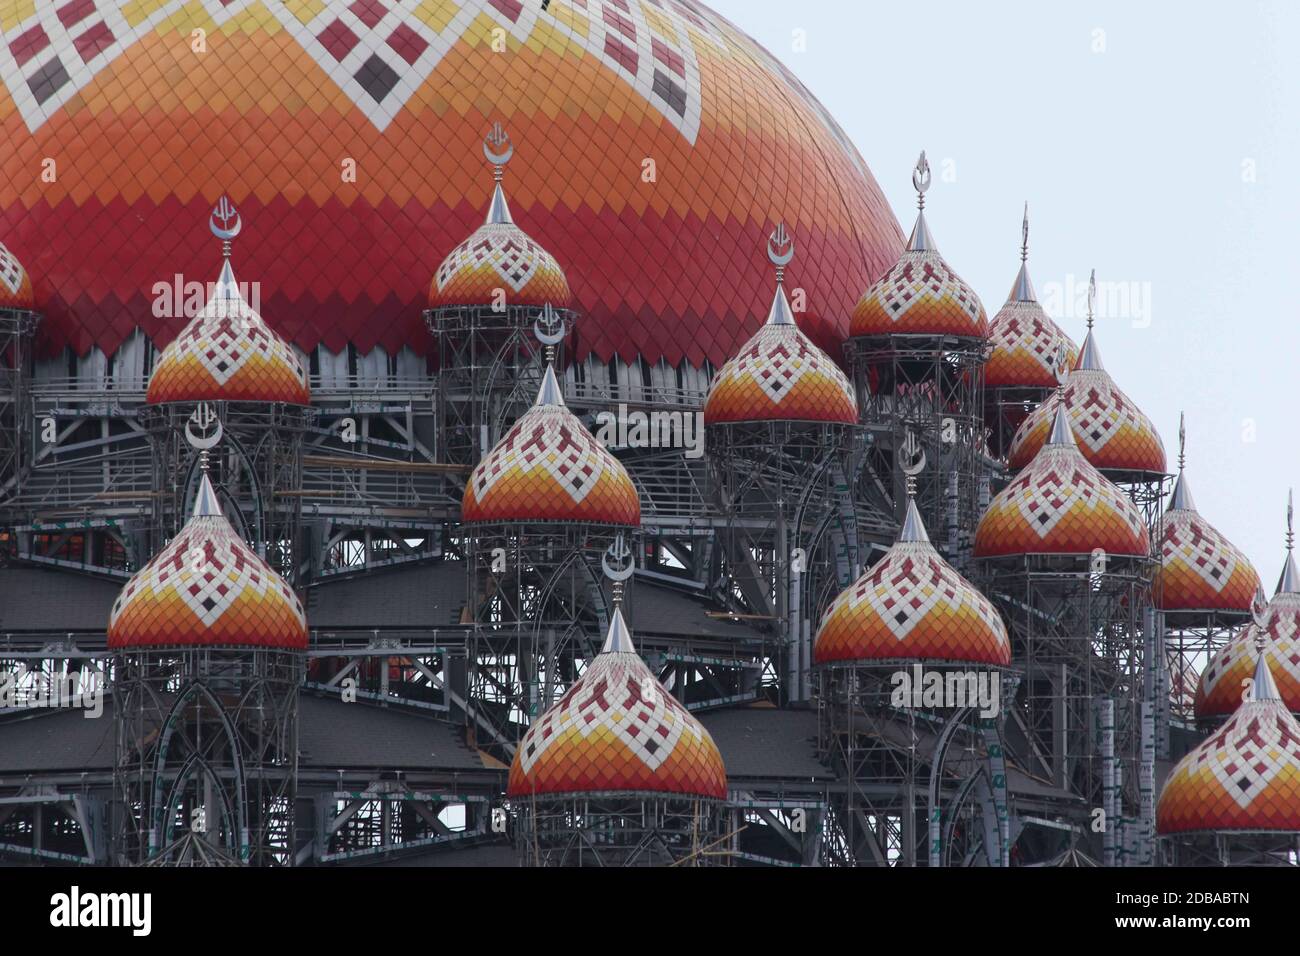 Close up shot of the 99 Dome Mosque in Makassar, Indonesia, during its construction. Stock Photo